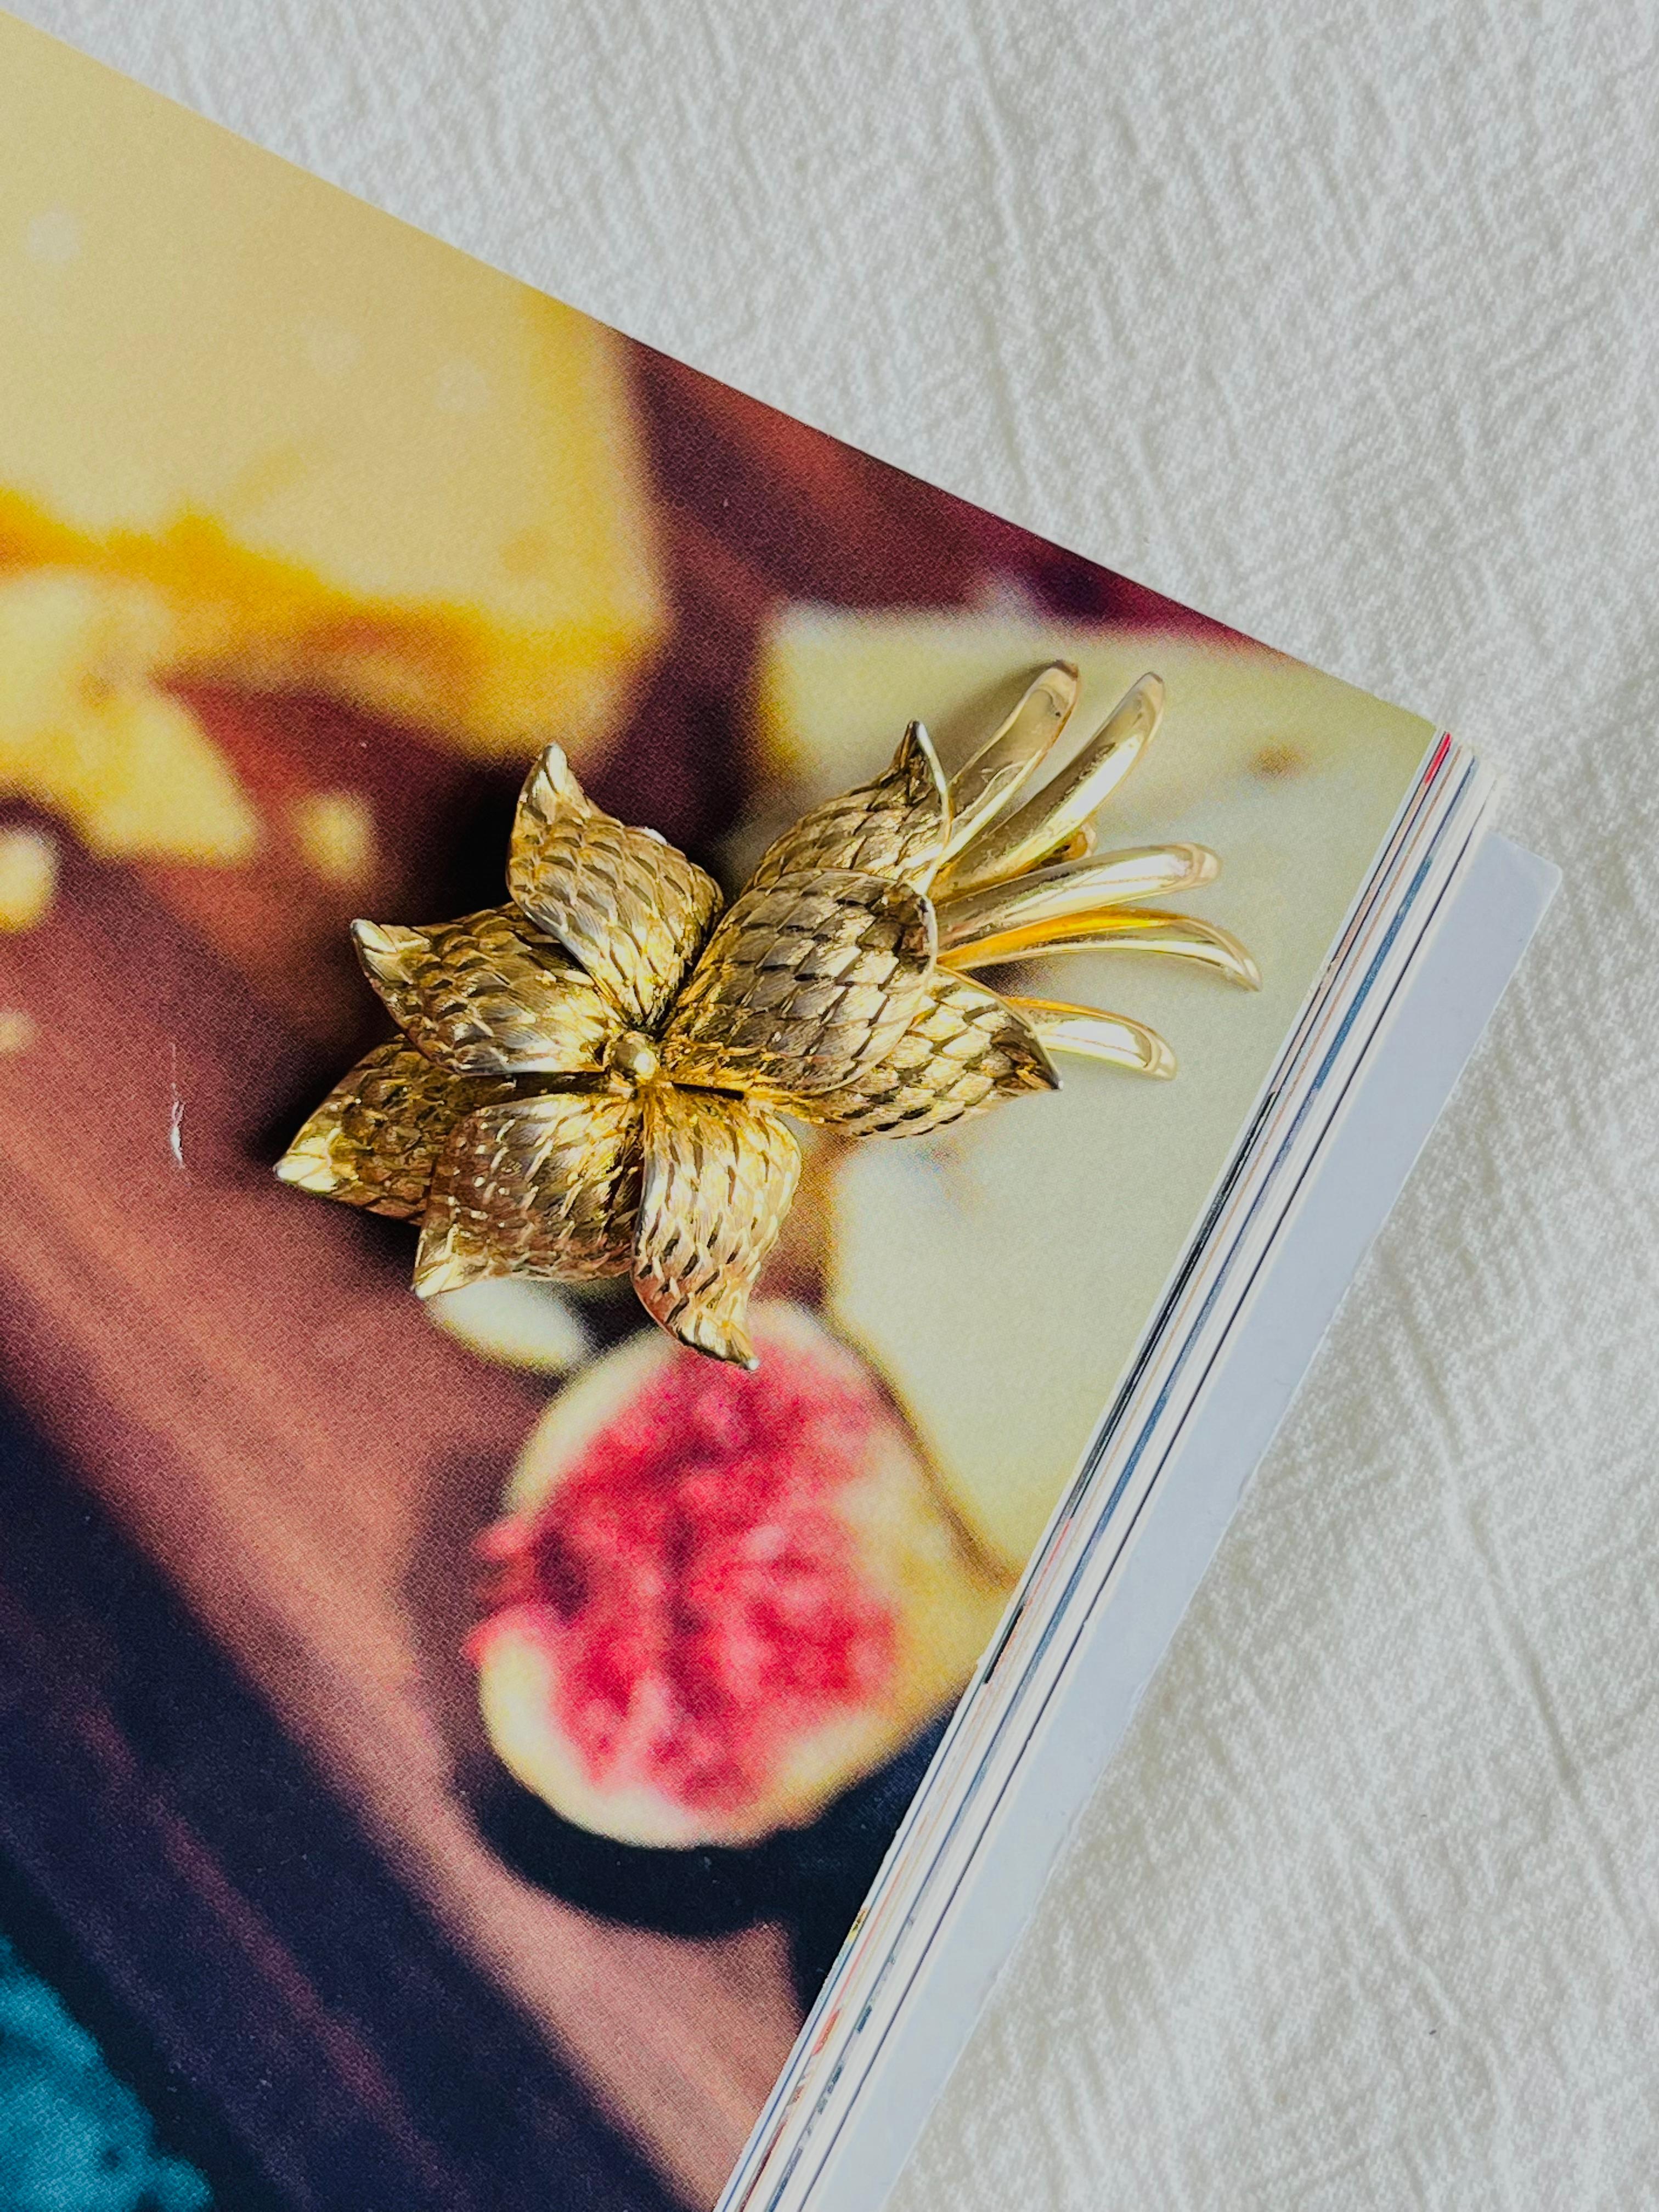 Christian Dior GROSSE 1963 Vintage Long Curled Flower Blossom Pinecone Brooch In Good Condition For Sale In Wokingham, England